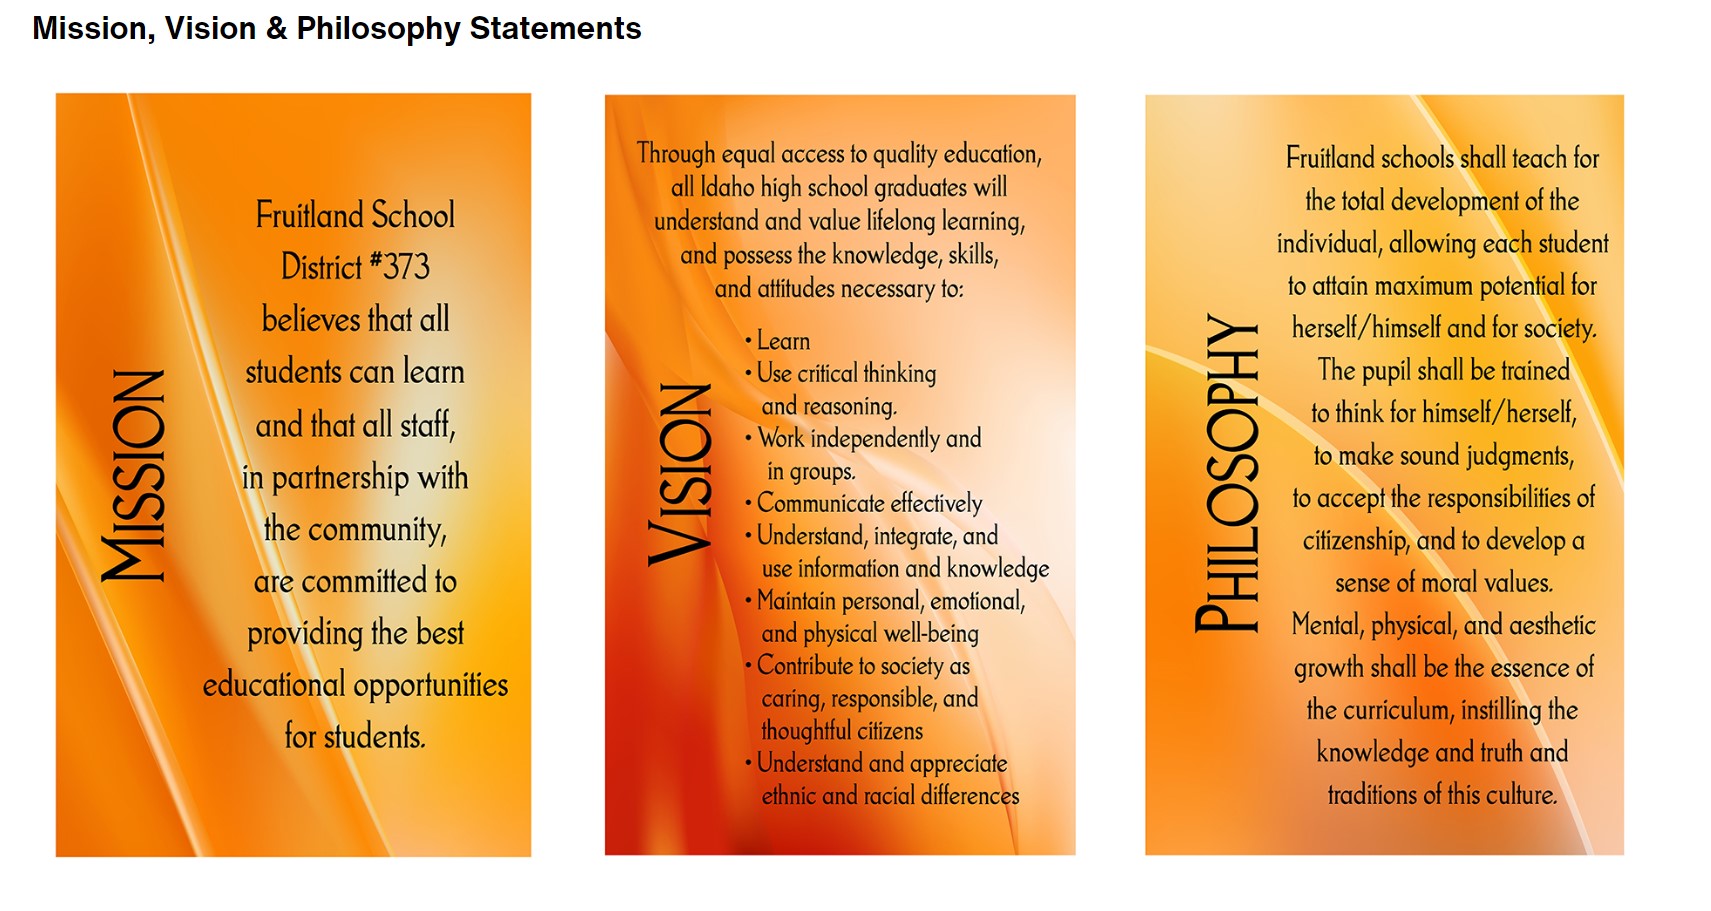 Mission, Vision, and Philosophy Statements